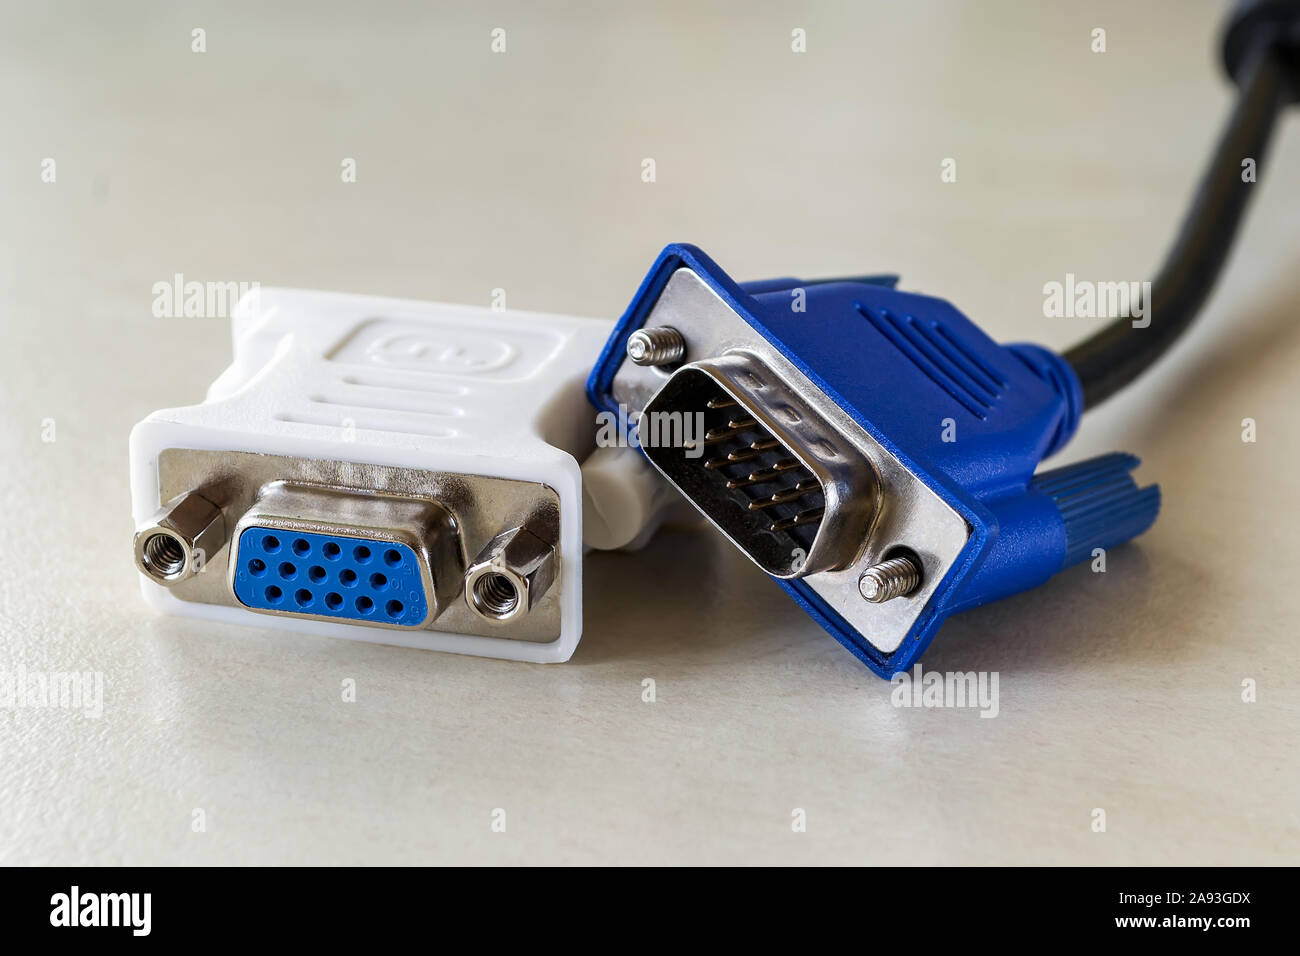 Vga plug of white dvi-d adapter and blue vga socket monitor cord near it.  Connection of computer devices with plugs of different types. Close-up  Stock Photo - Alamy